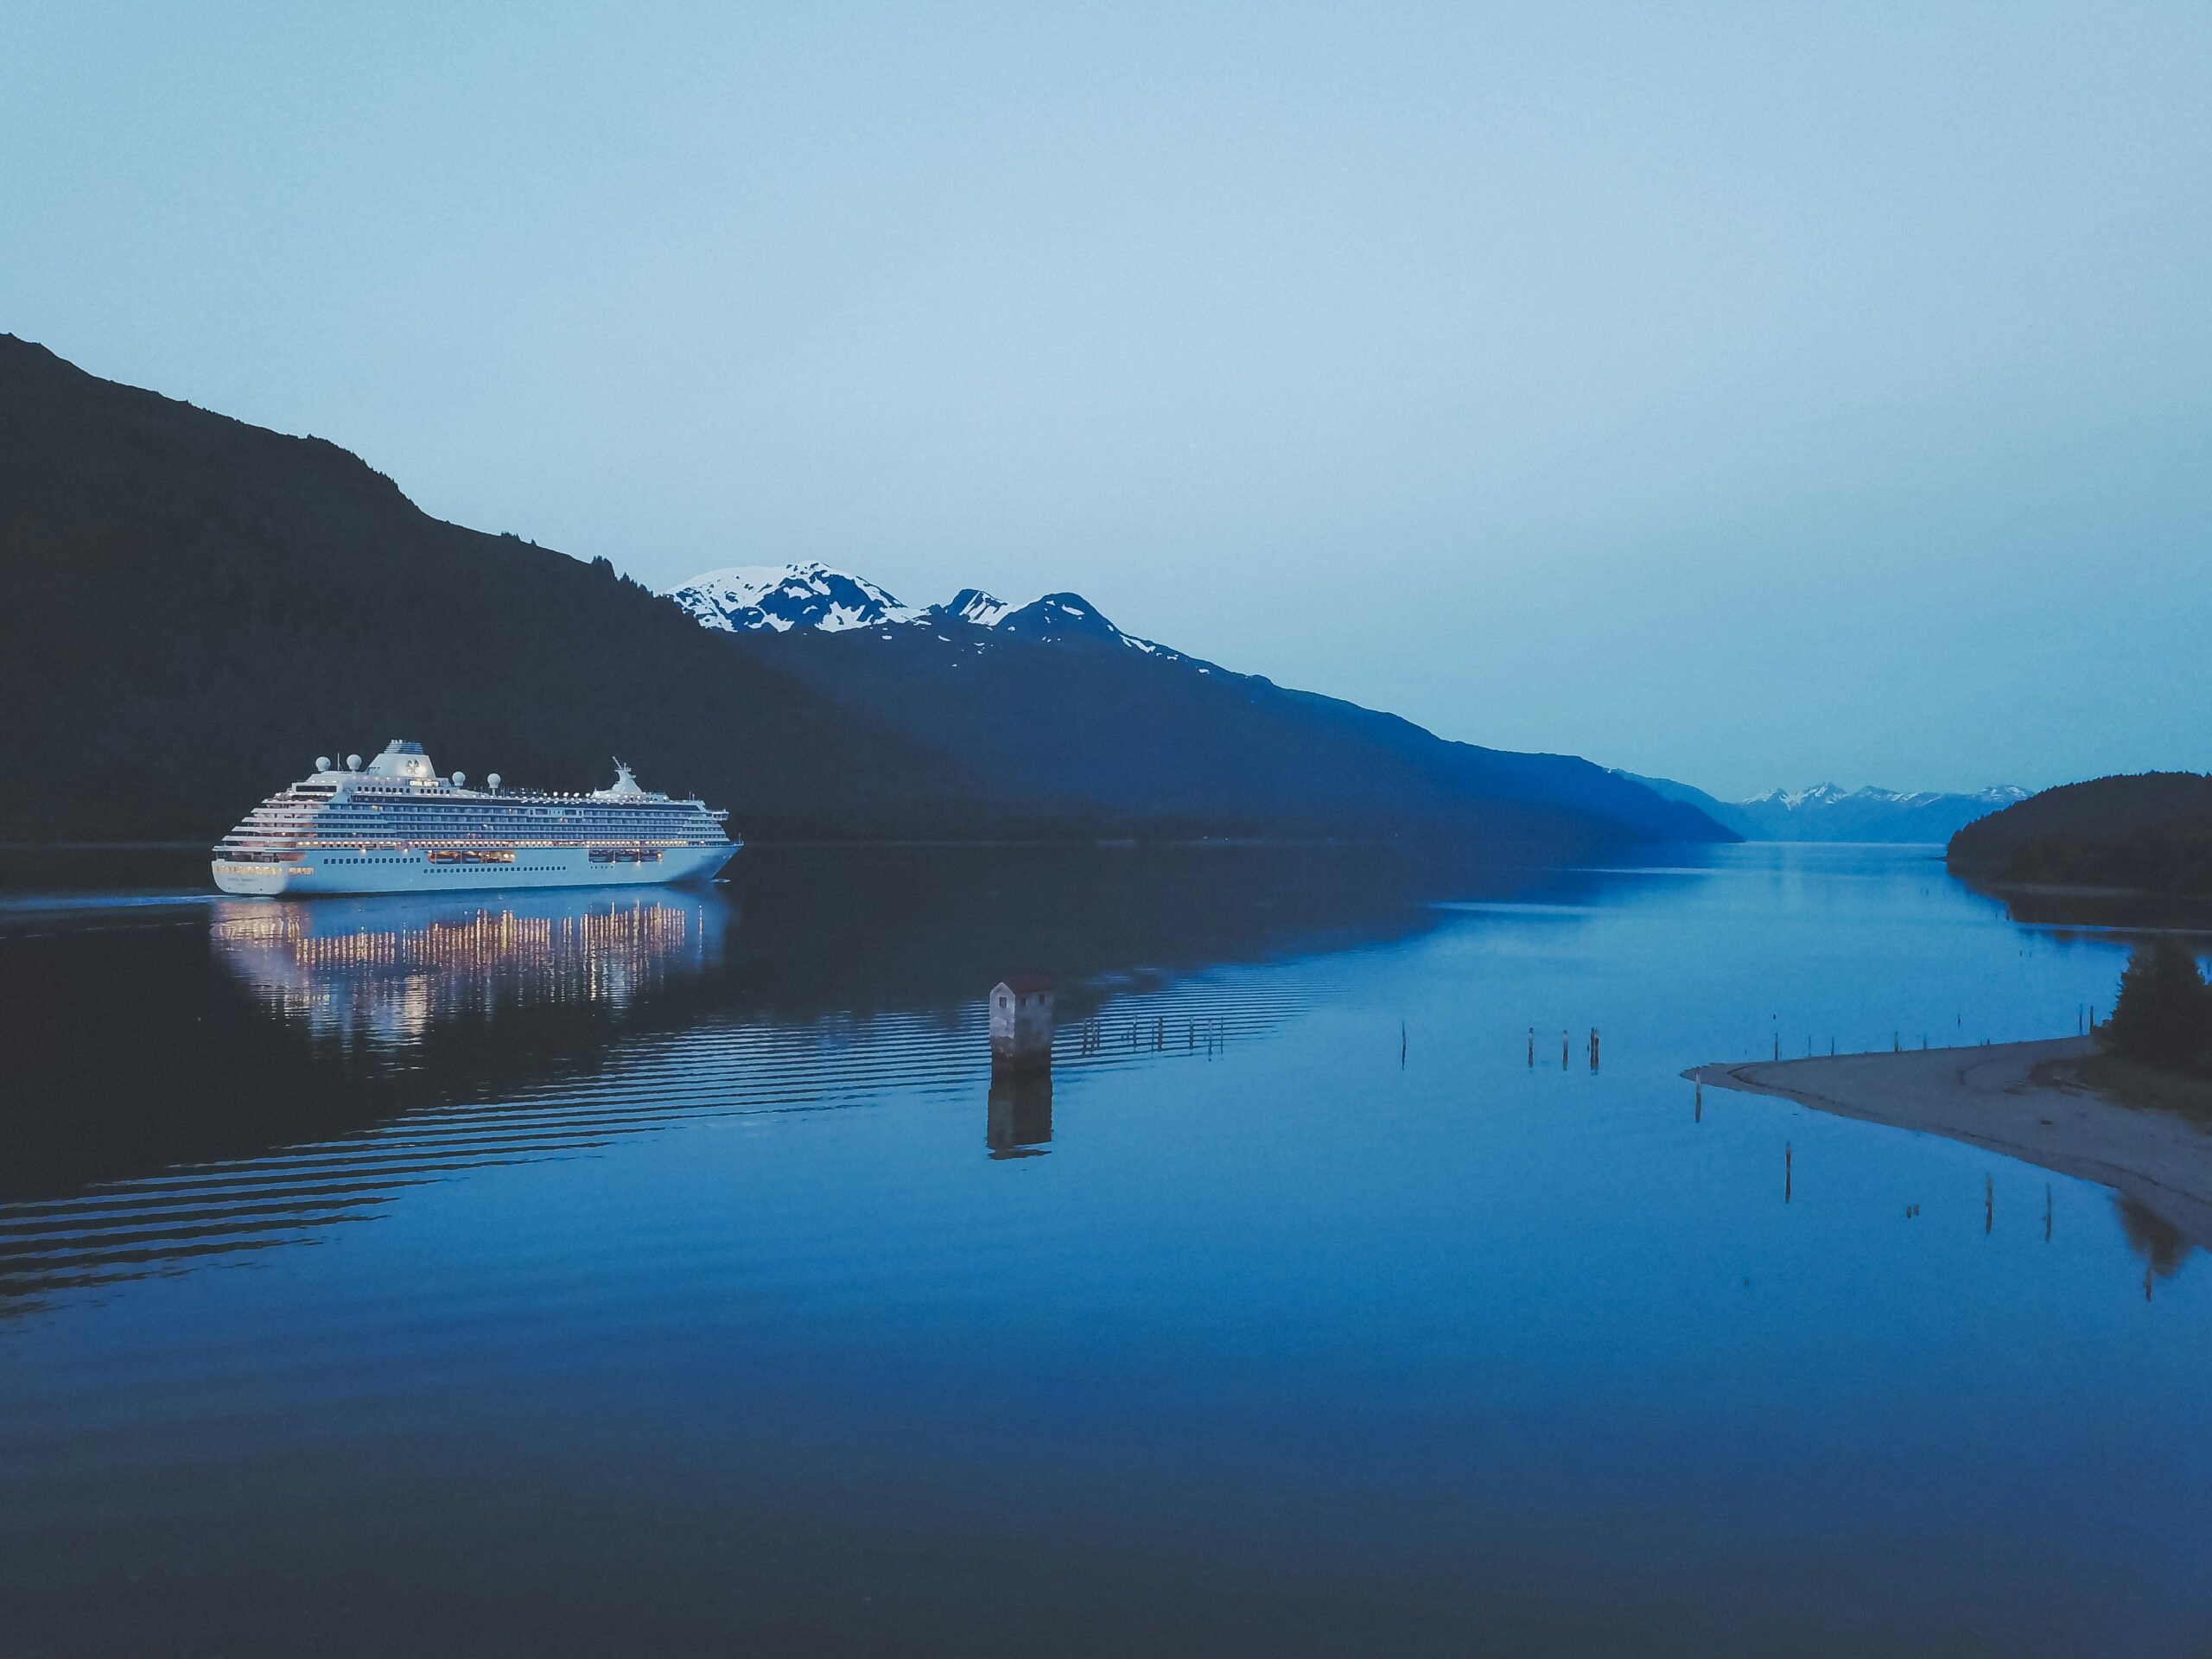 These ten excursions in Alaska are the best options for cruisers.
pictured: a cruise in the waters of Alaska with snowy mountains in the background